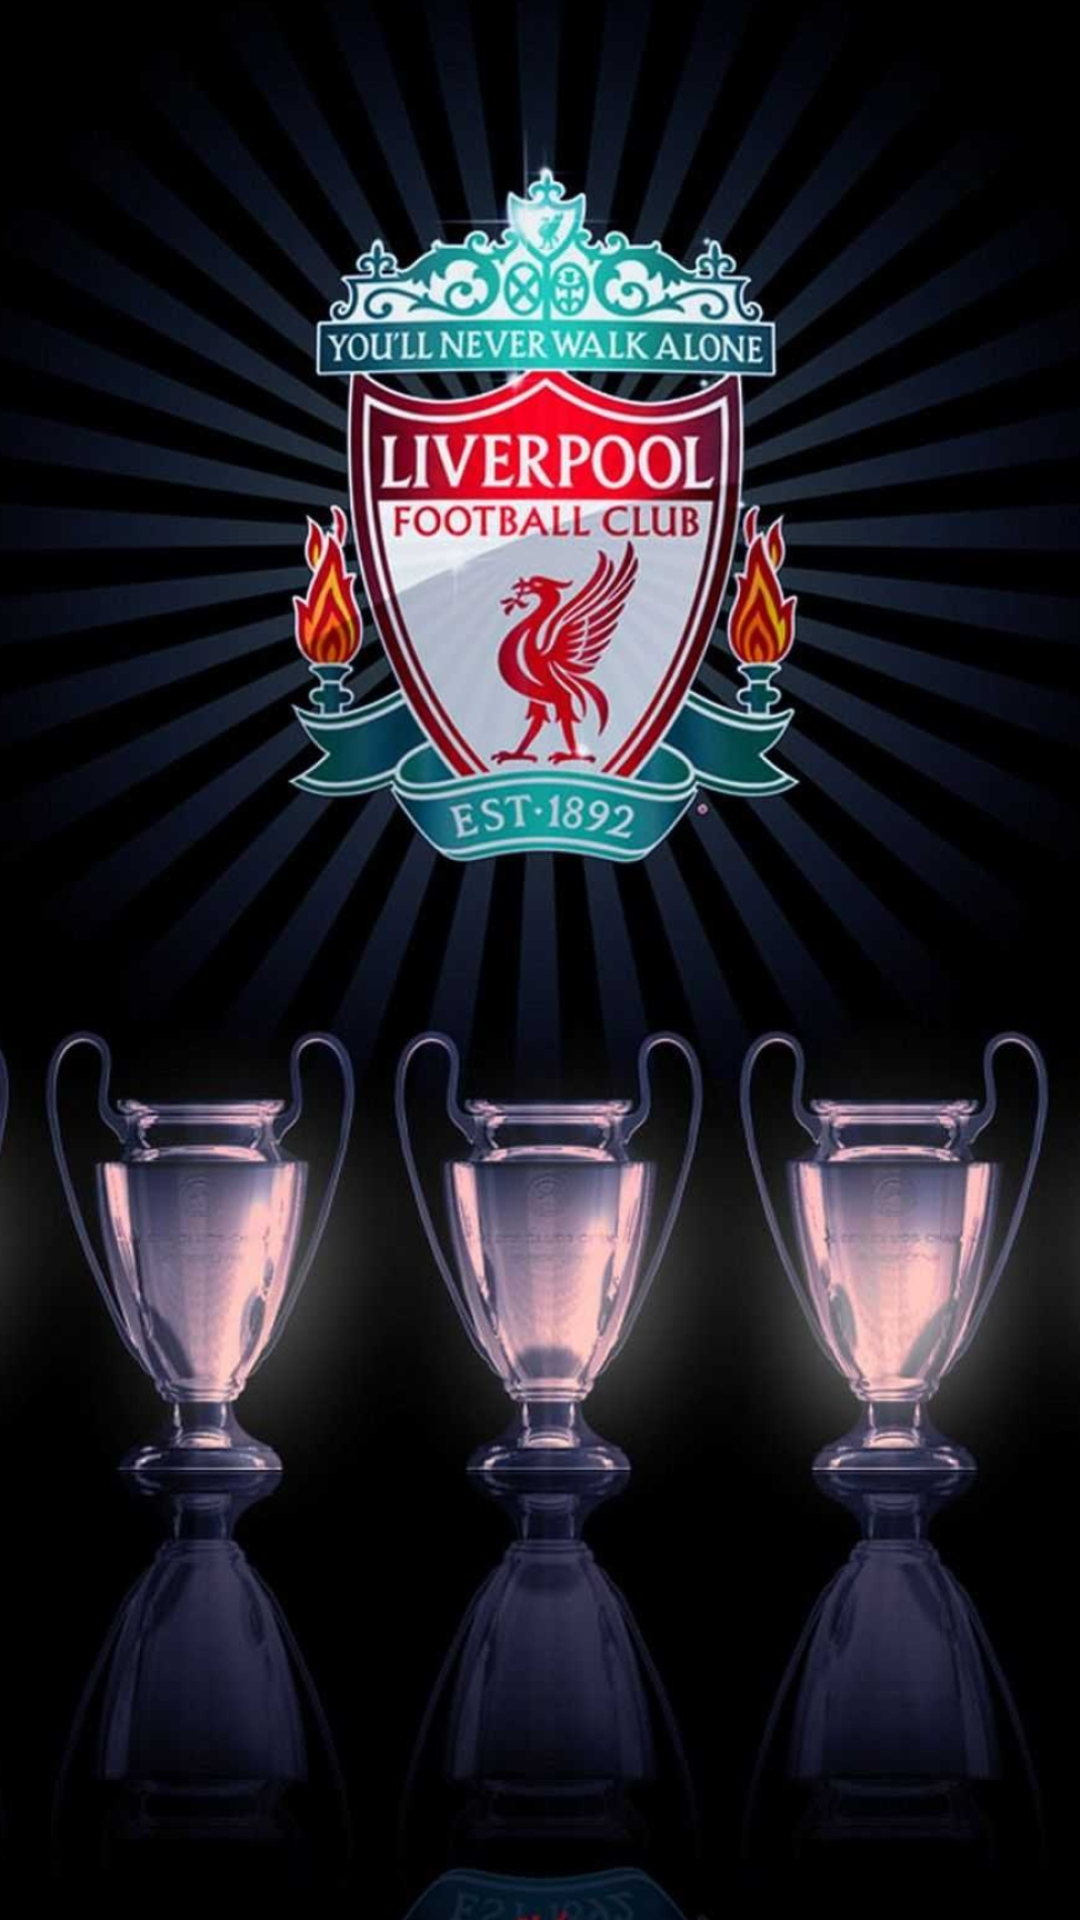 Liverpool Football Club: Bob Paisley, The club's most successful manager in Europe, with five trophies. 1080x1920 Full HD Background.